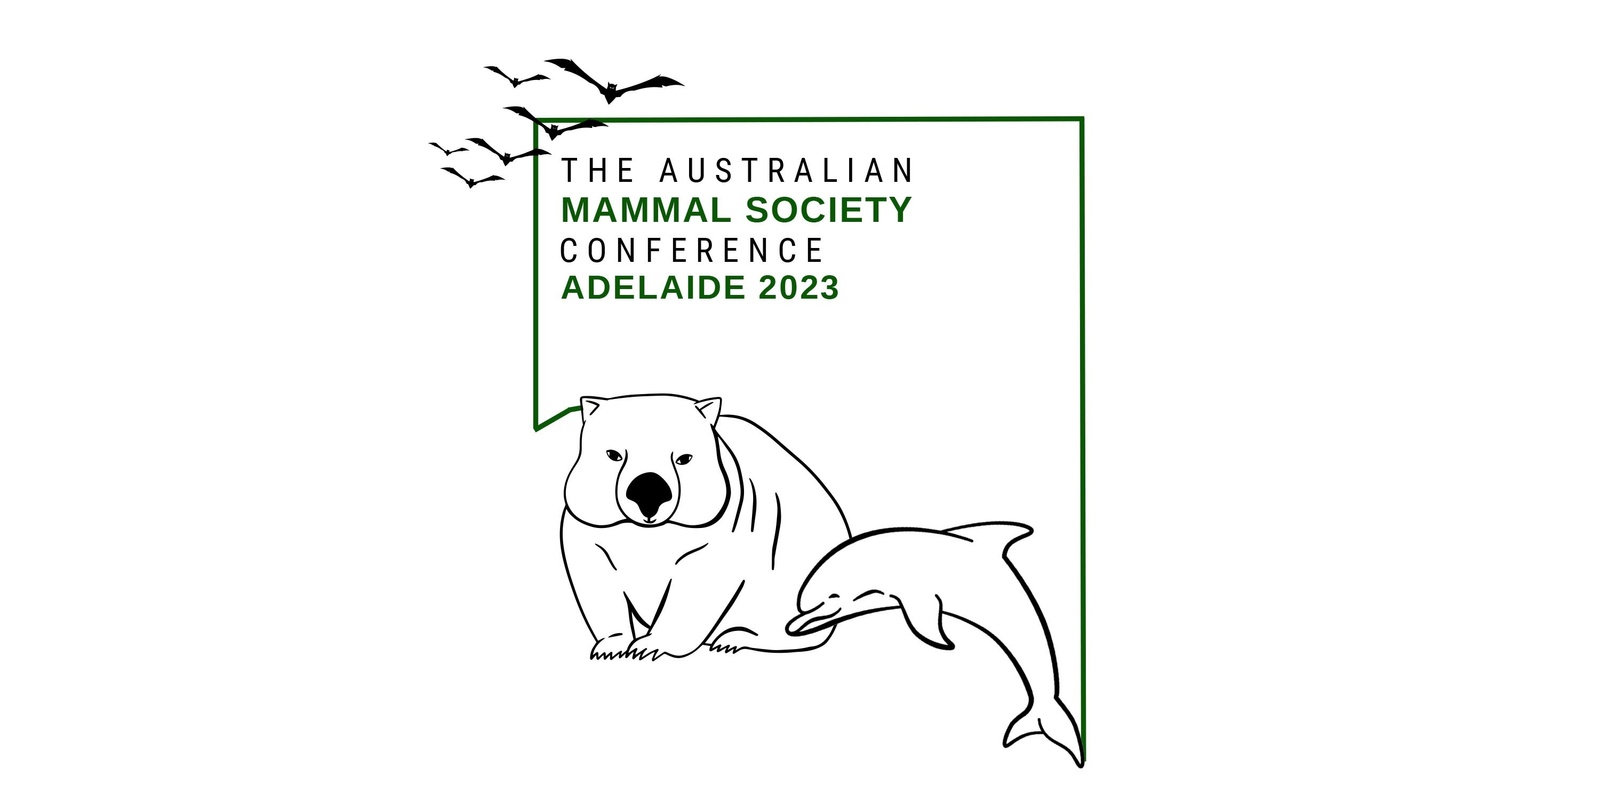 Banner image for 69th Annual Scientific Meeting of the Australian Mammal Society